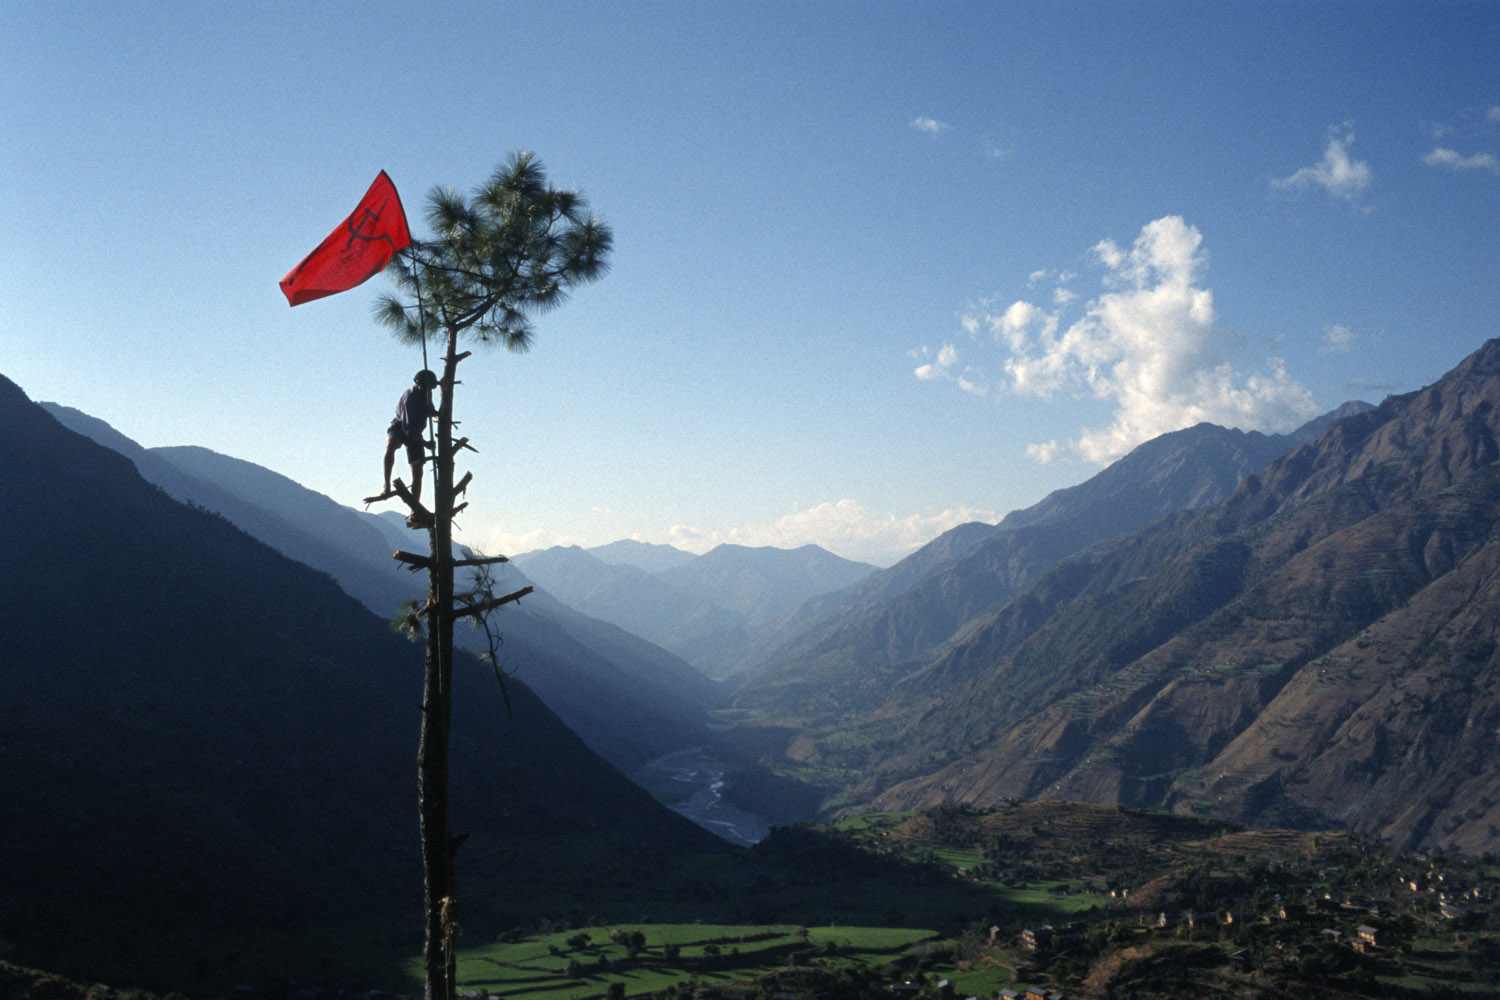 2000: Tomas van HoutryveNabin Pun, a Maoist rebel soldier of the People's Liberation Army, raises the communist flag from a tree above the village of Rukumkot, Nepal on Feb. 11, 2005.
                              “Nick Ut and Kim Phuc gave presentations at the Eddie Adams workshop I attended. What struck me during their talks was how Nick had managed to take the picture of Kim fleeing from the napalm attack, and as soon as he had the photo, he carried her to the hospital. He took one of the most important and iconic photos of the Vietnam War, yet he didn't lose sight of his basic humanity to help out a little girl in pain. In a very tough conflict situation he played it just right. It was a lesson from a rare story outside the viewfinder—of how photojournalists should behave. It stuck with me. Don't miss your shot, and don't let it distract you from your moral duties to fellow human beings.”